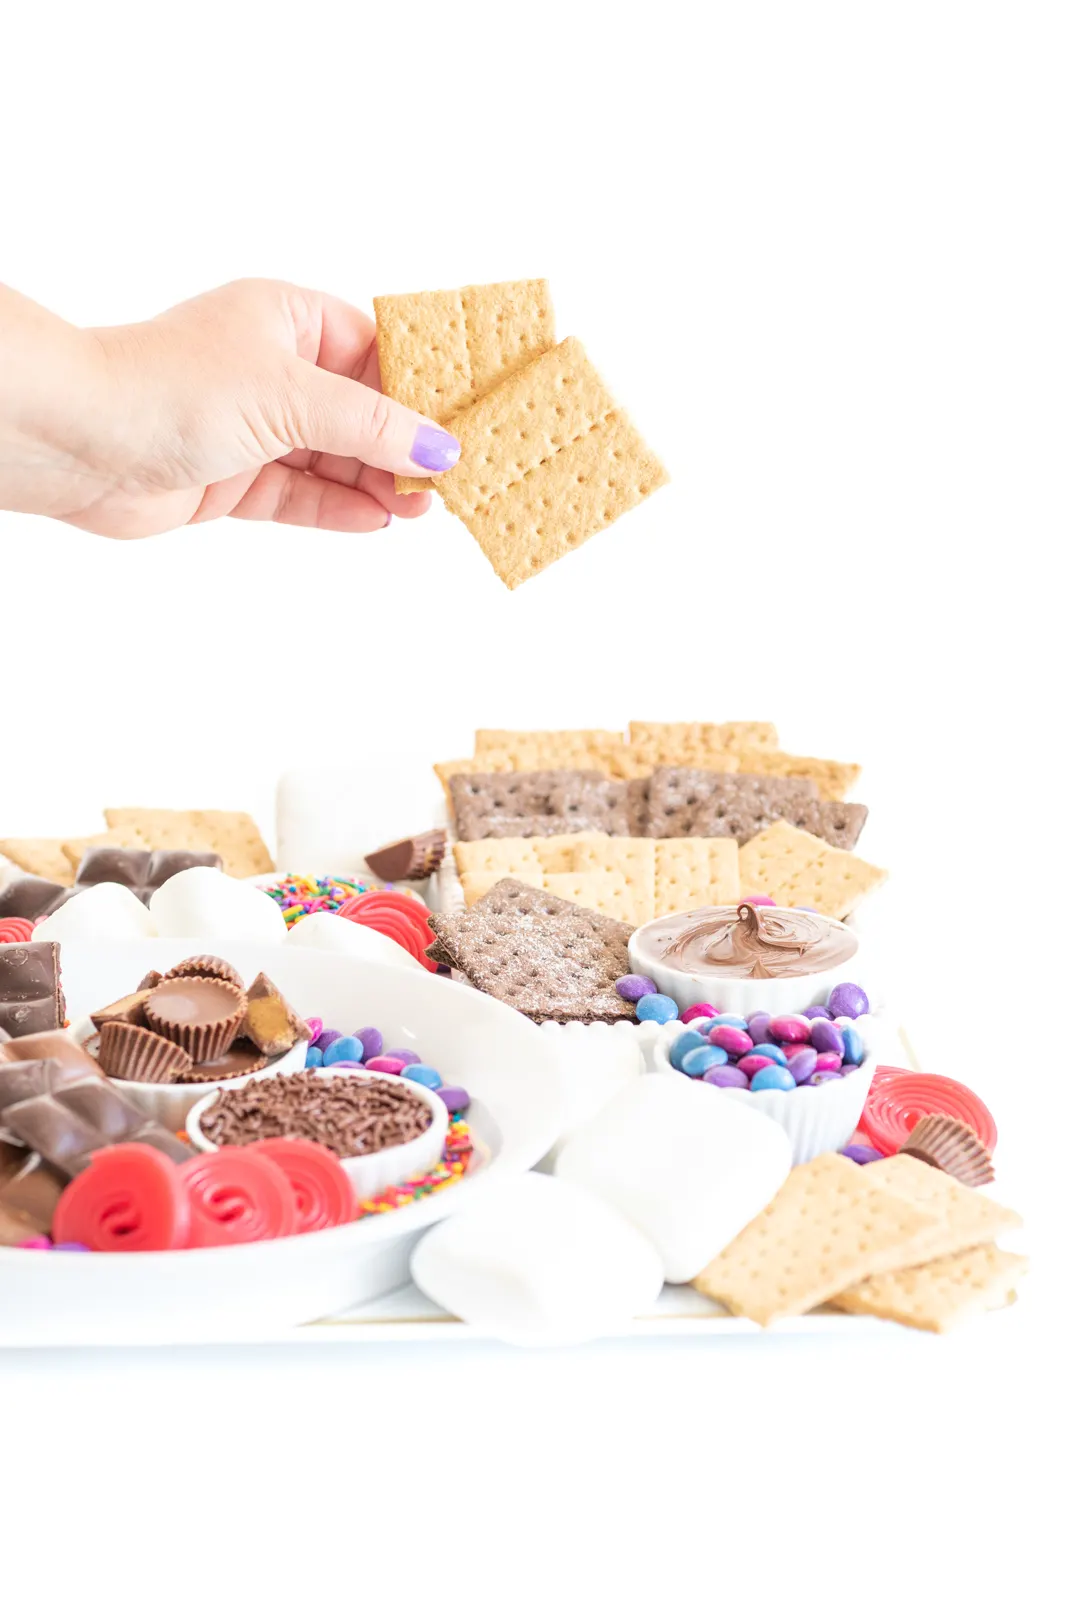 setting up a s'mores dessert board with graham crackers, candies and chocolate